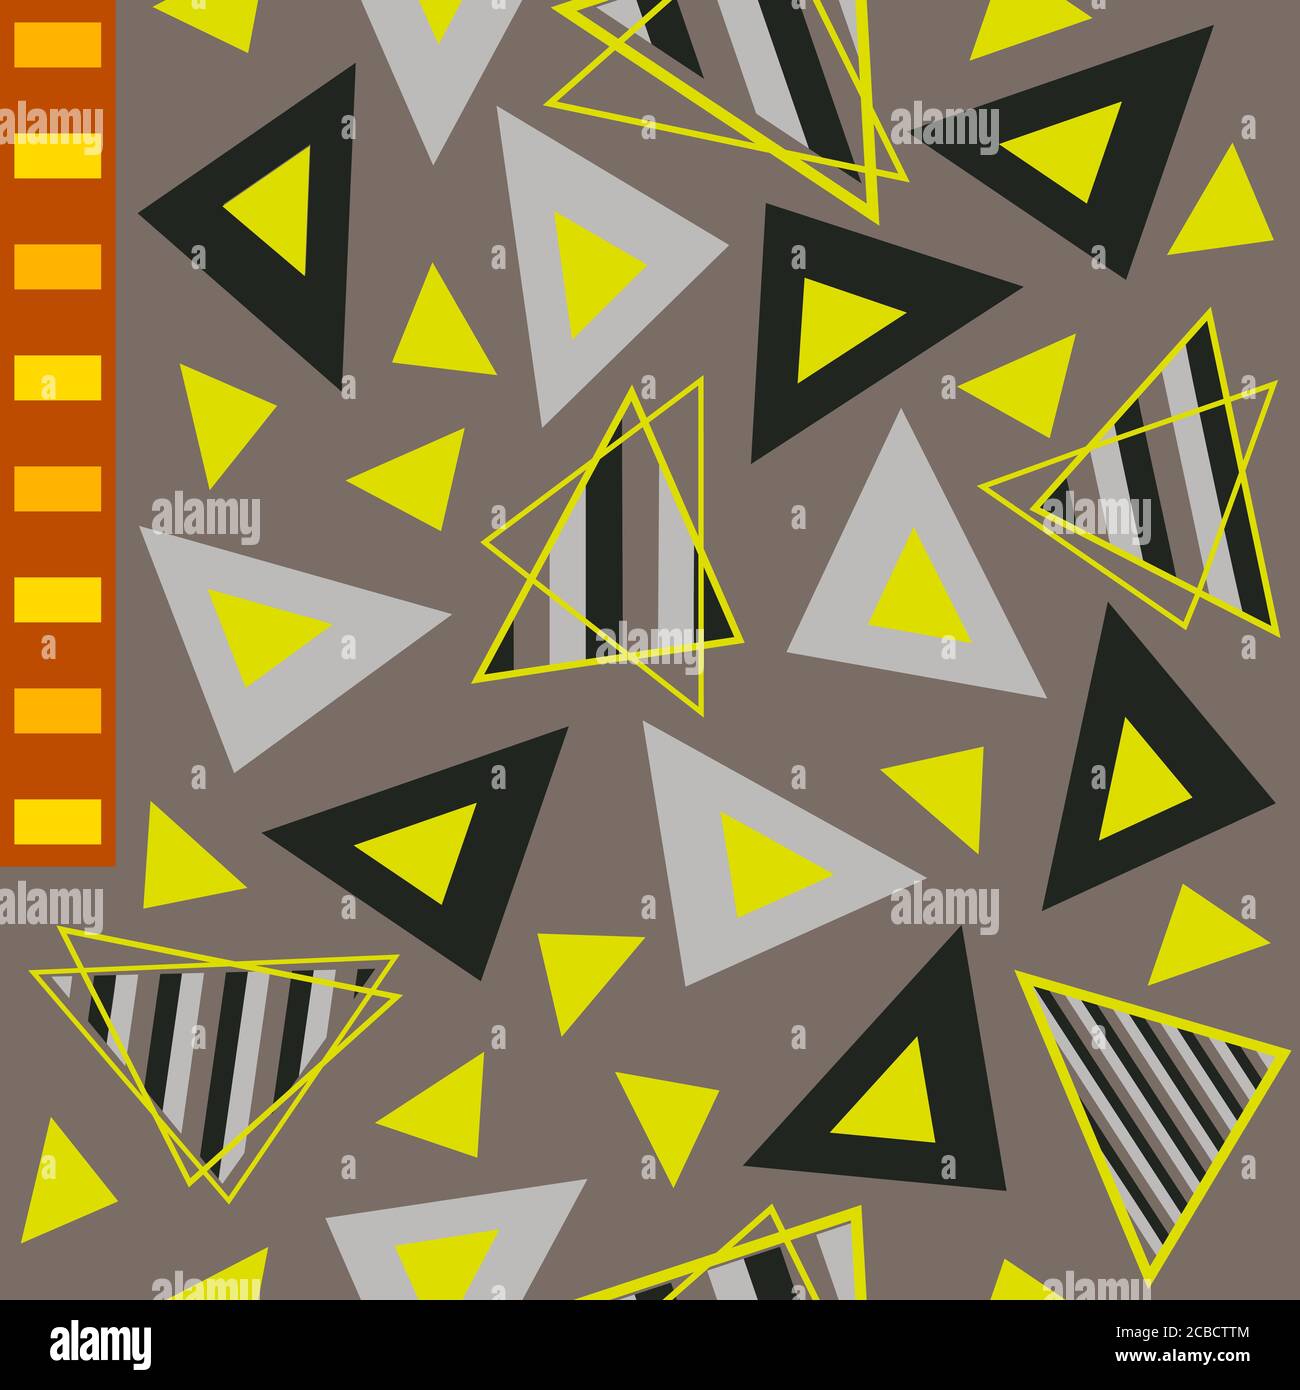 Black, grey, neon yellow, stripes filled triangles and orangy reddish rectangles geometric pattern. For variety of digital, web and print applications Stock Vector